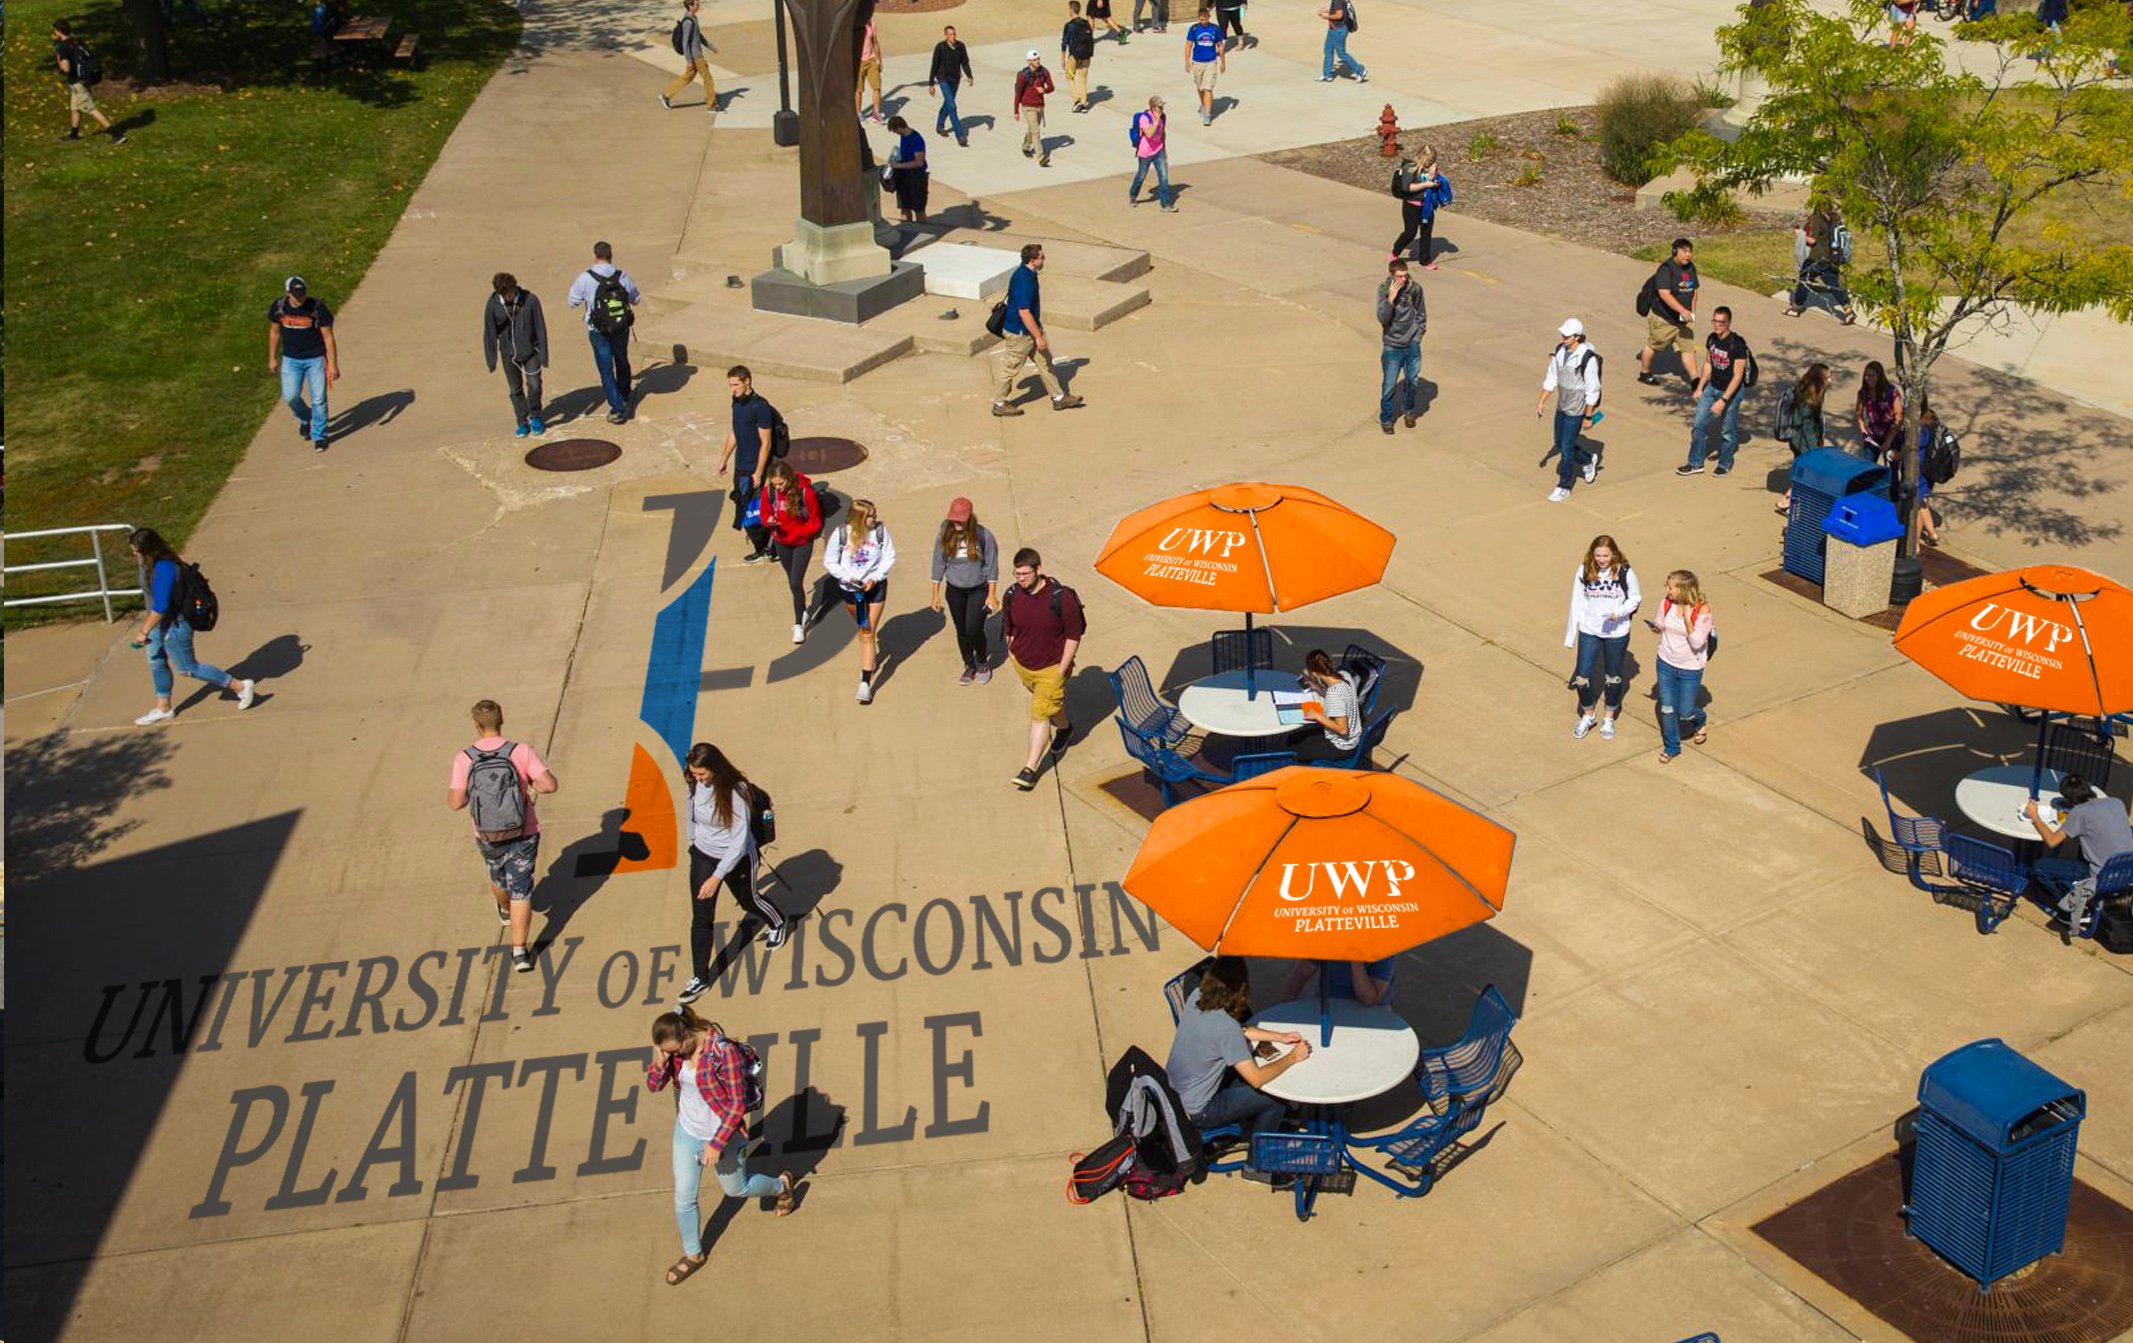 The University of Wisconsin-Platteville campus walkway displaying the Vendi-created P logo on the sidewalk and on table umbrellas